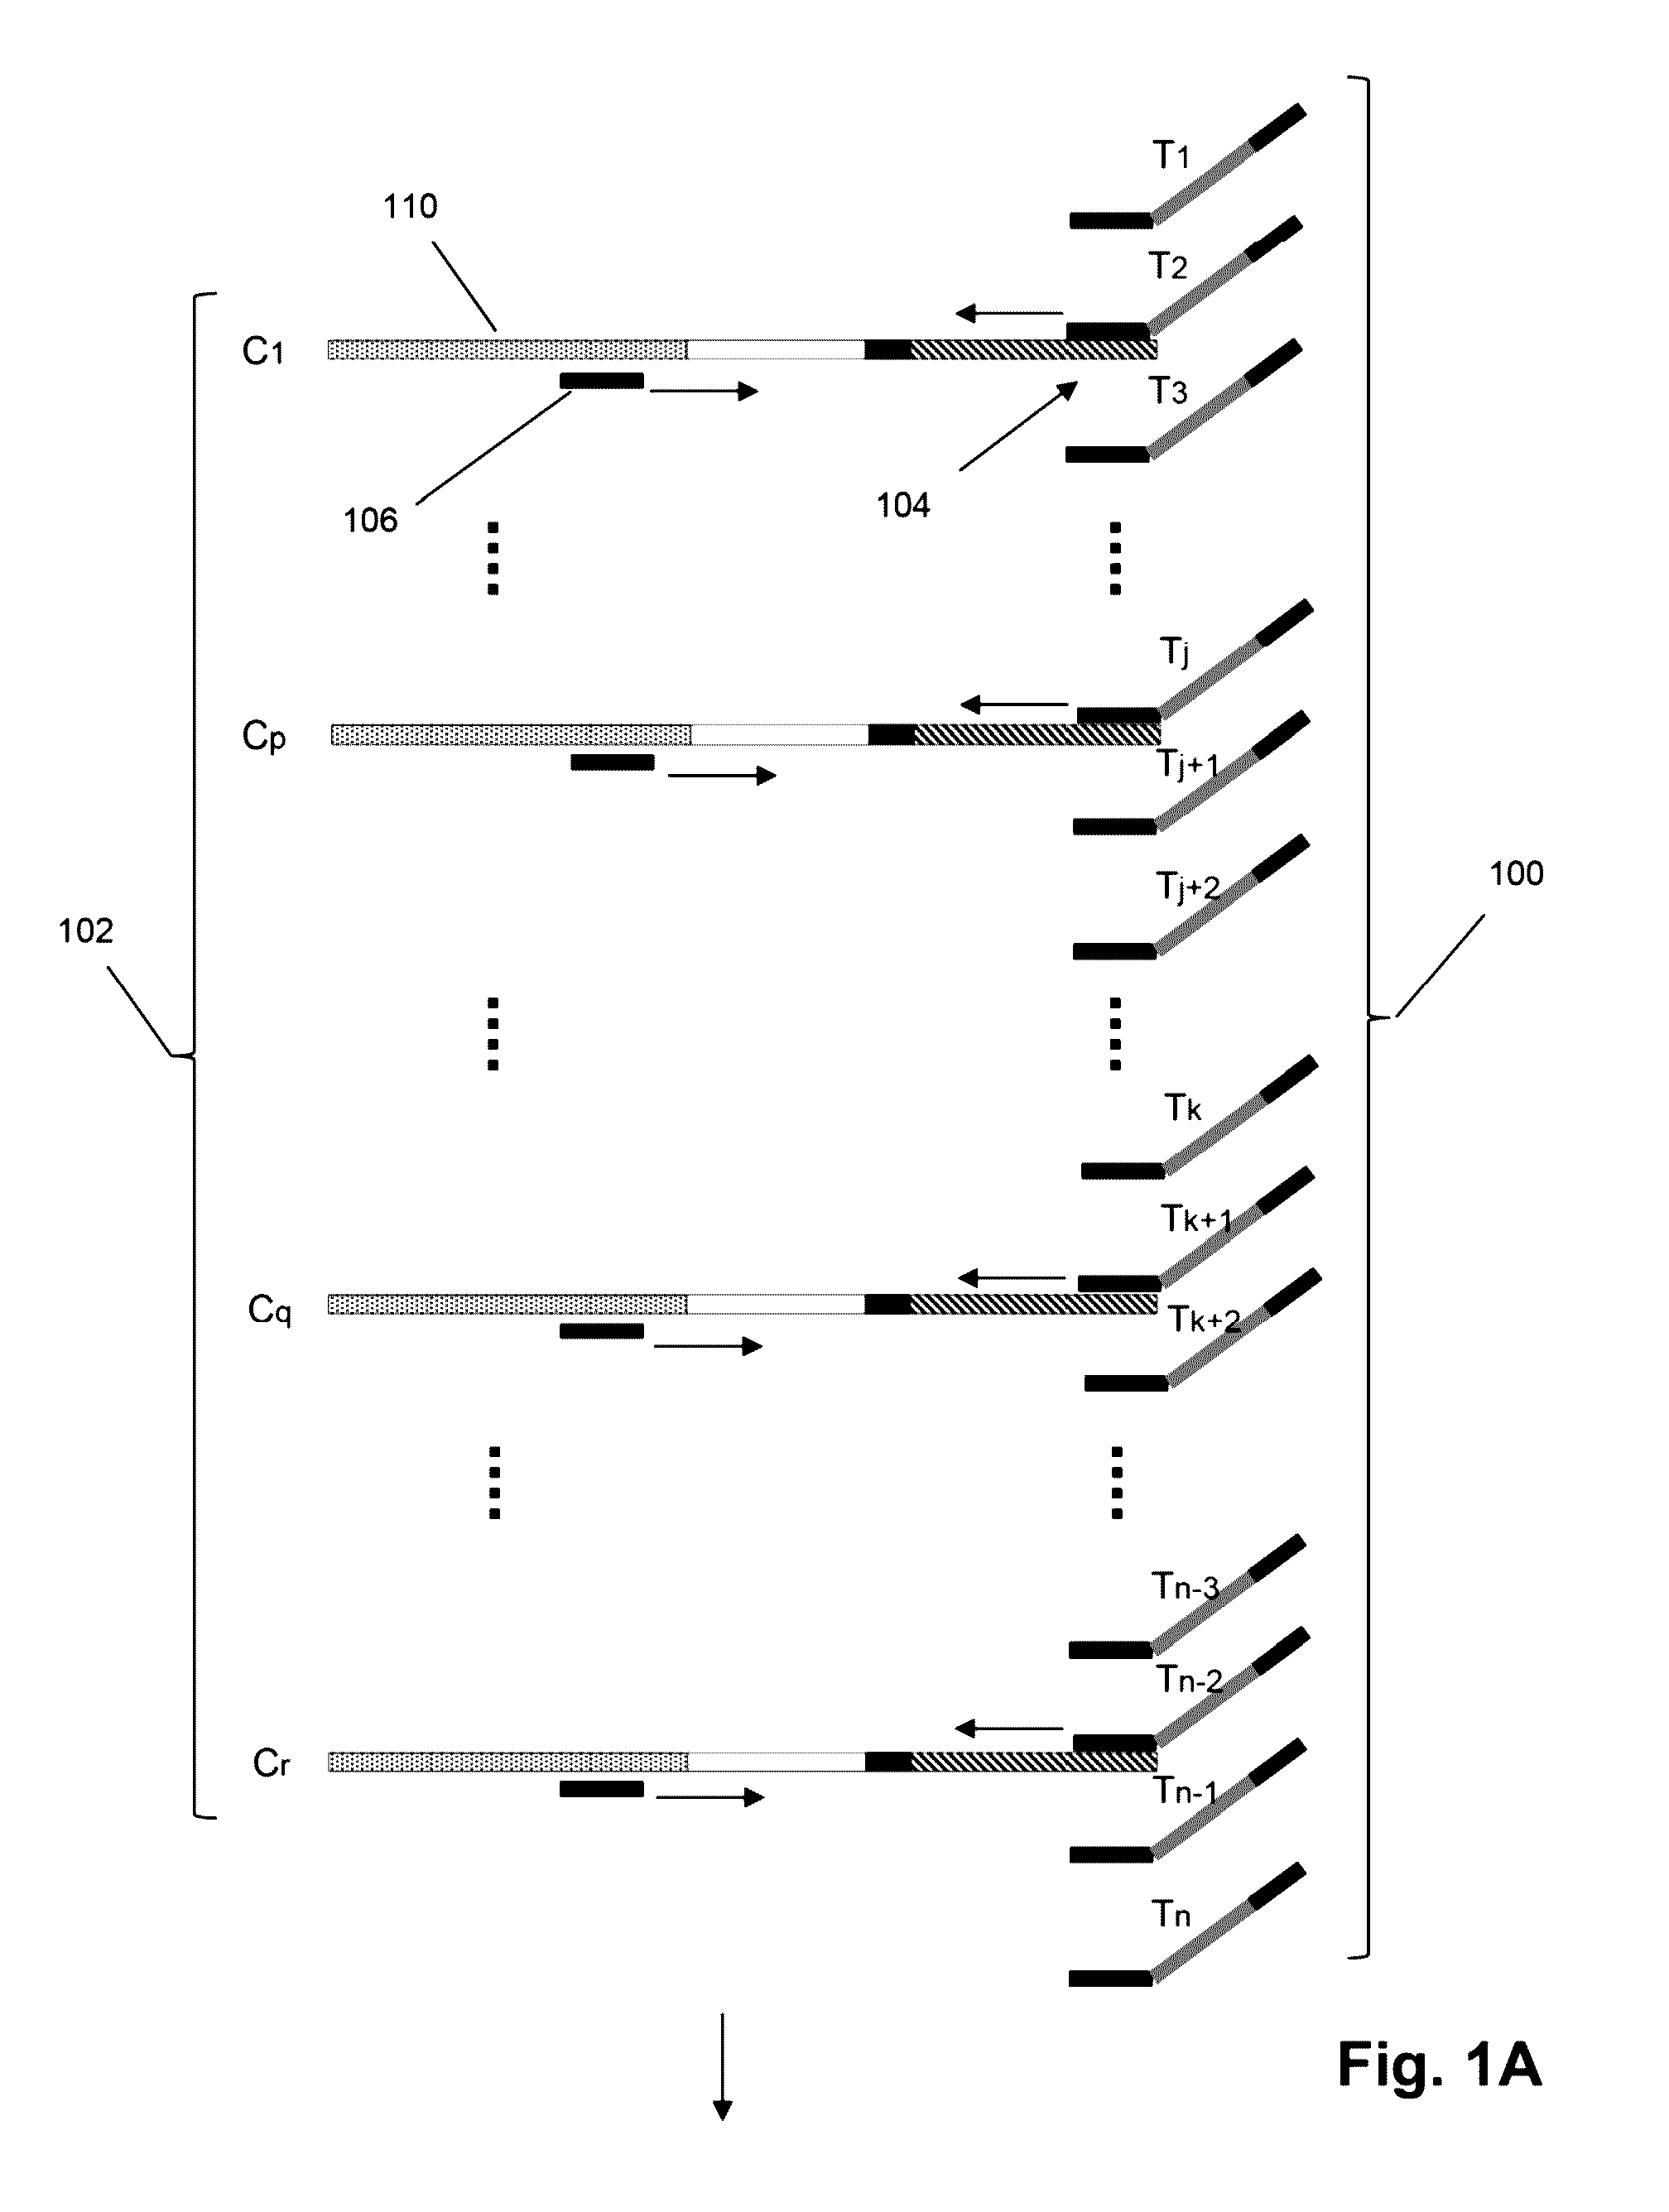 Method of sequence determination using sequence tags